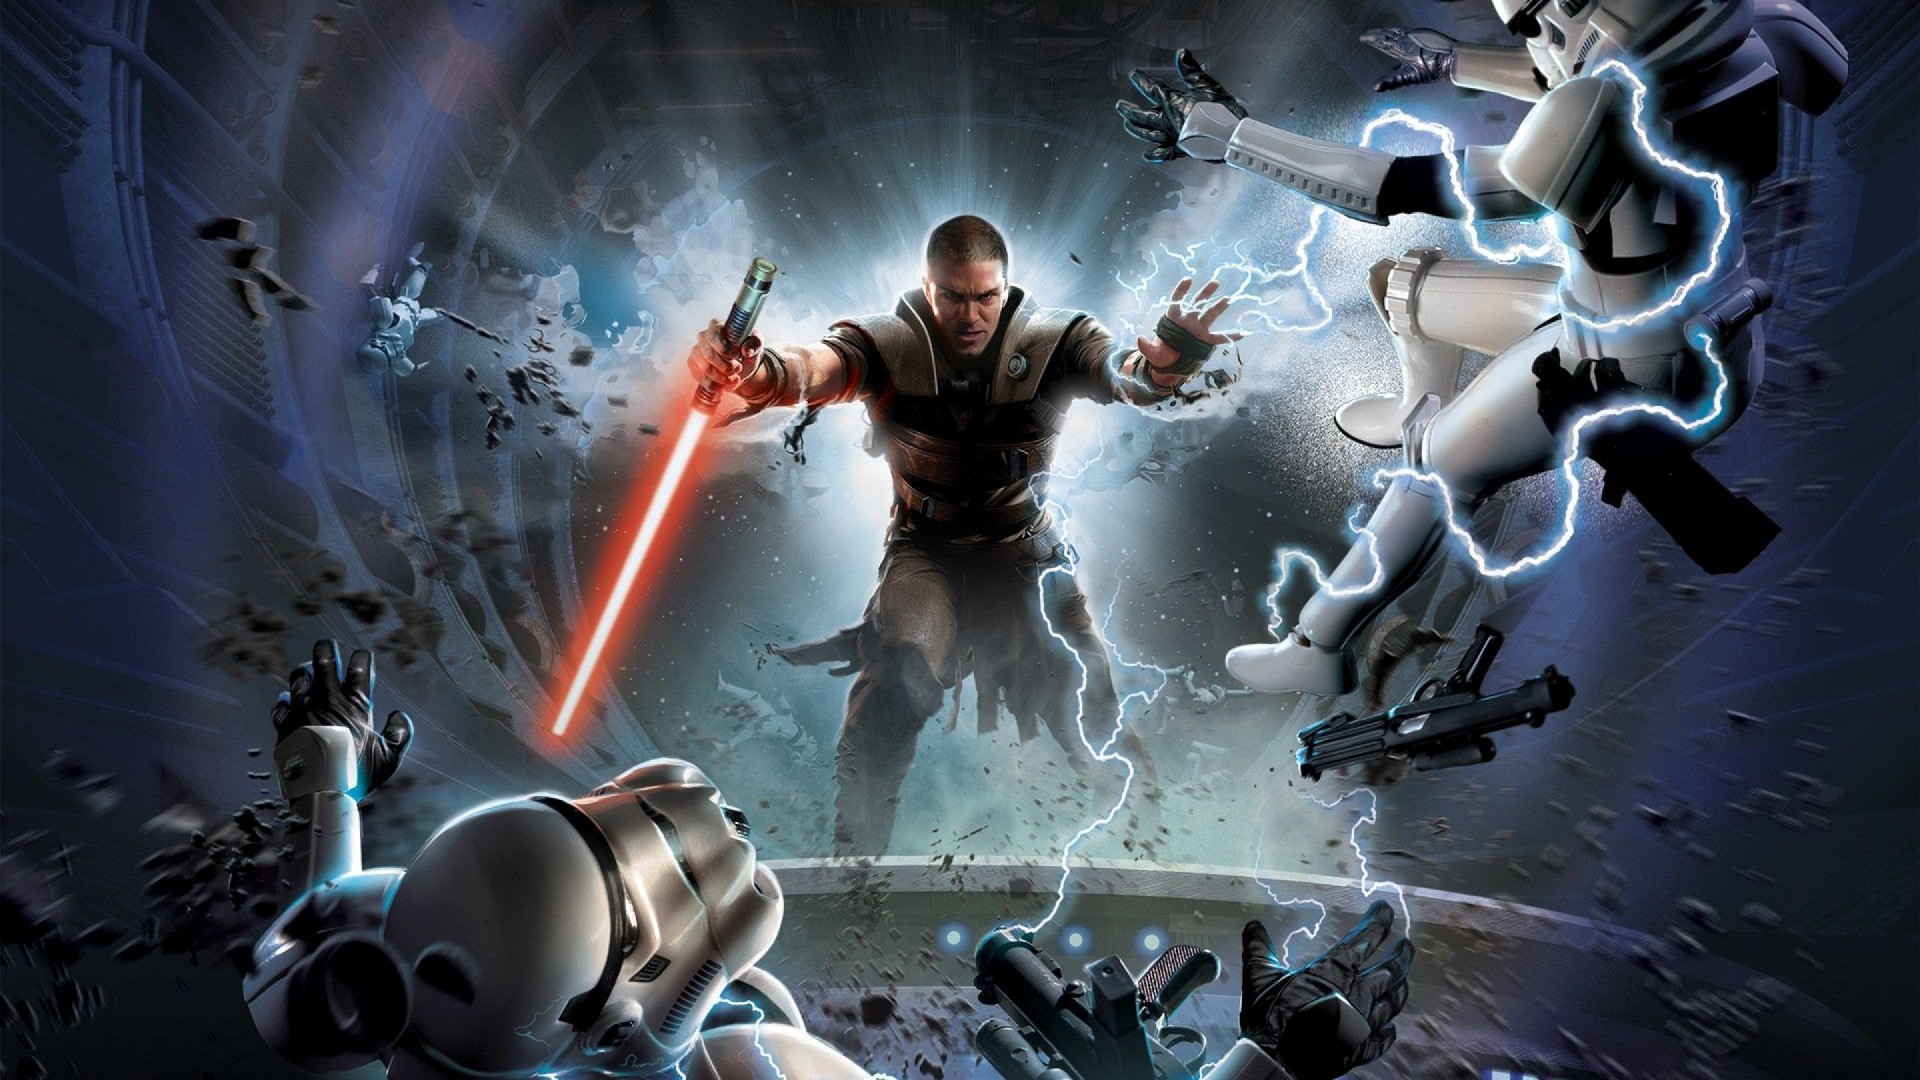 Star Wars The Force Unleashed is force jumping onto Switch this April